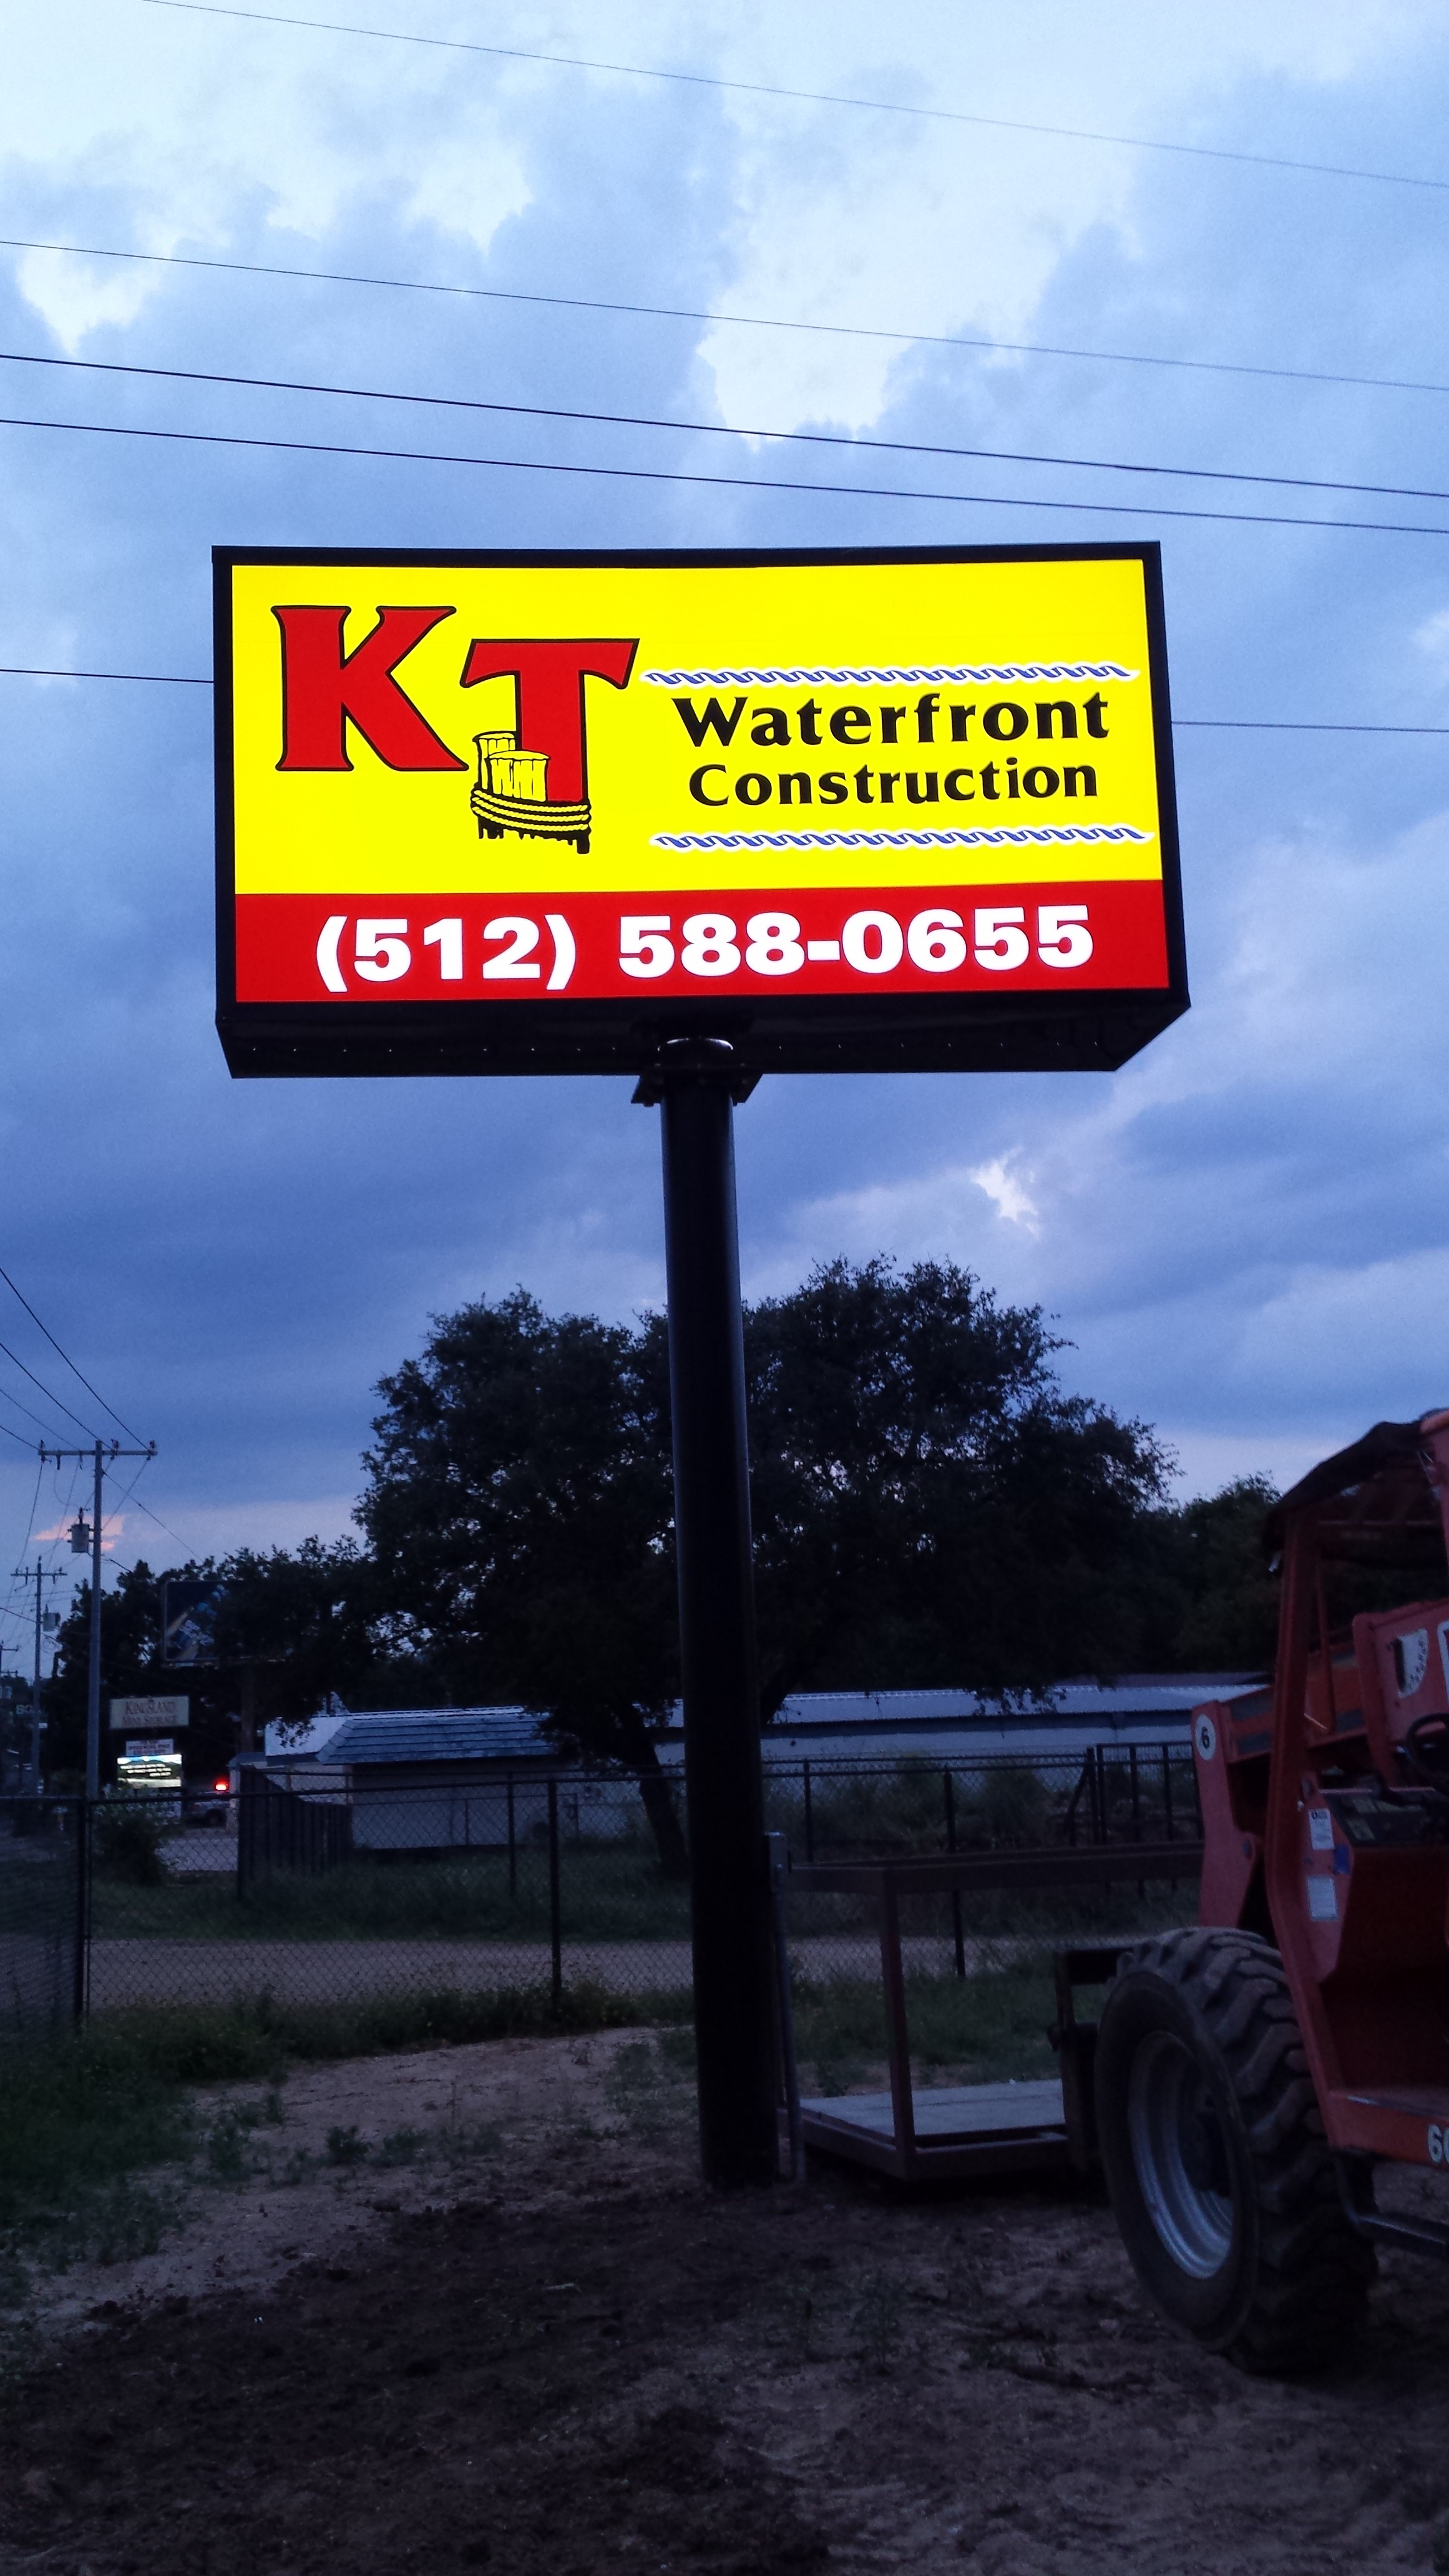 Large Business Signs